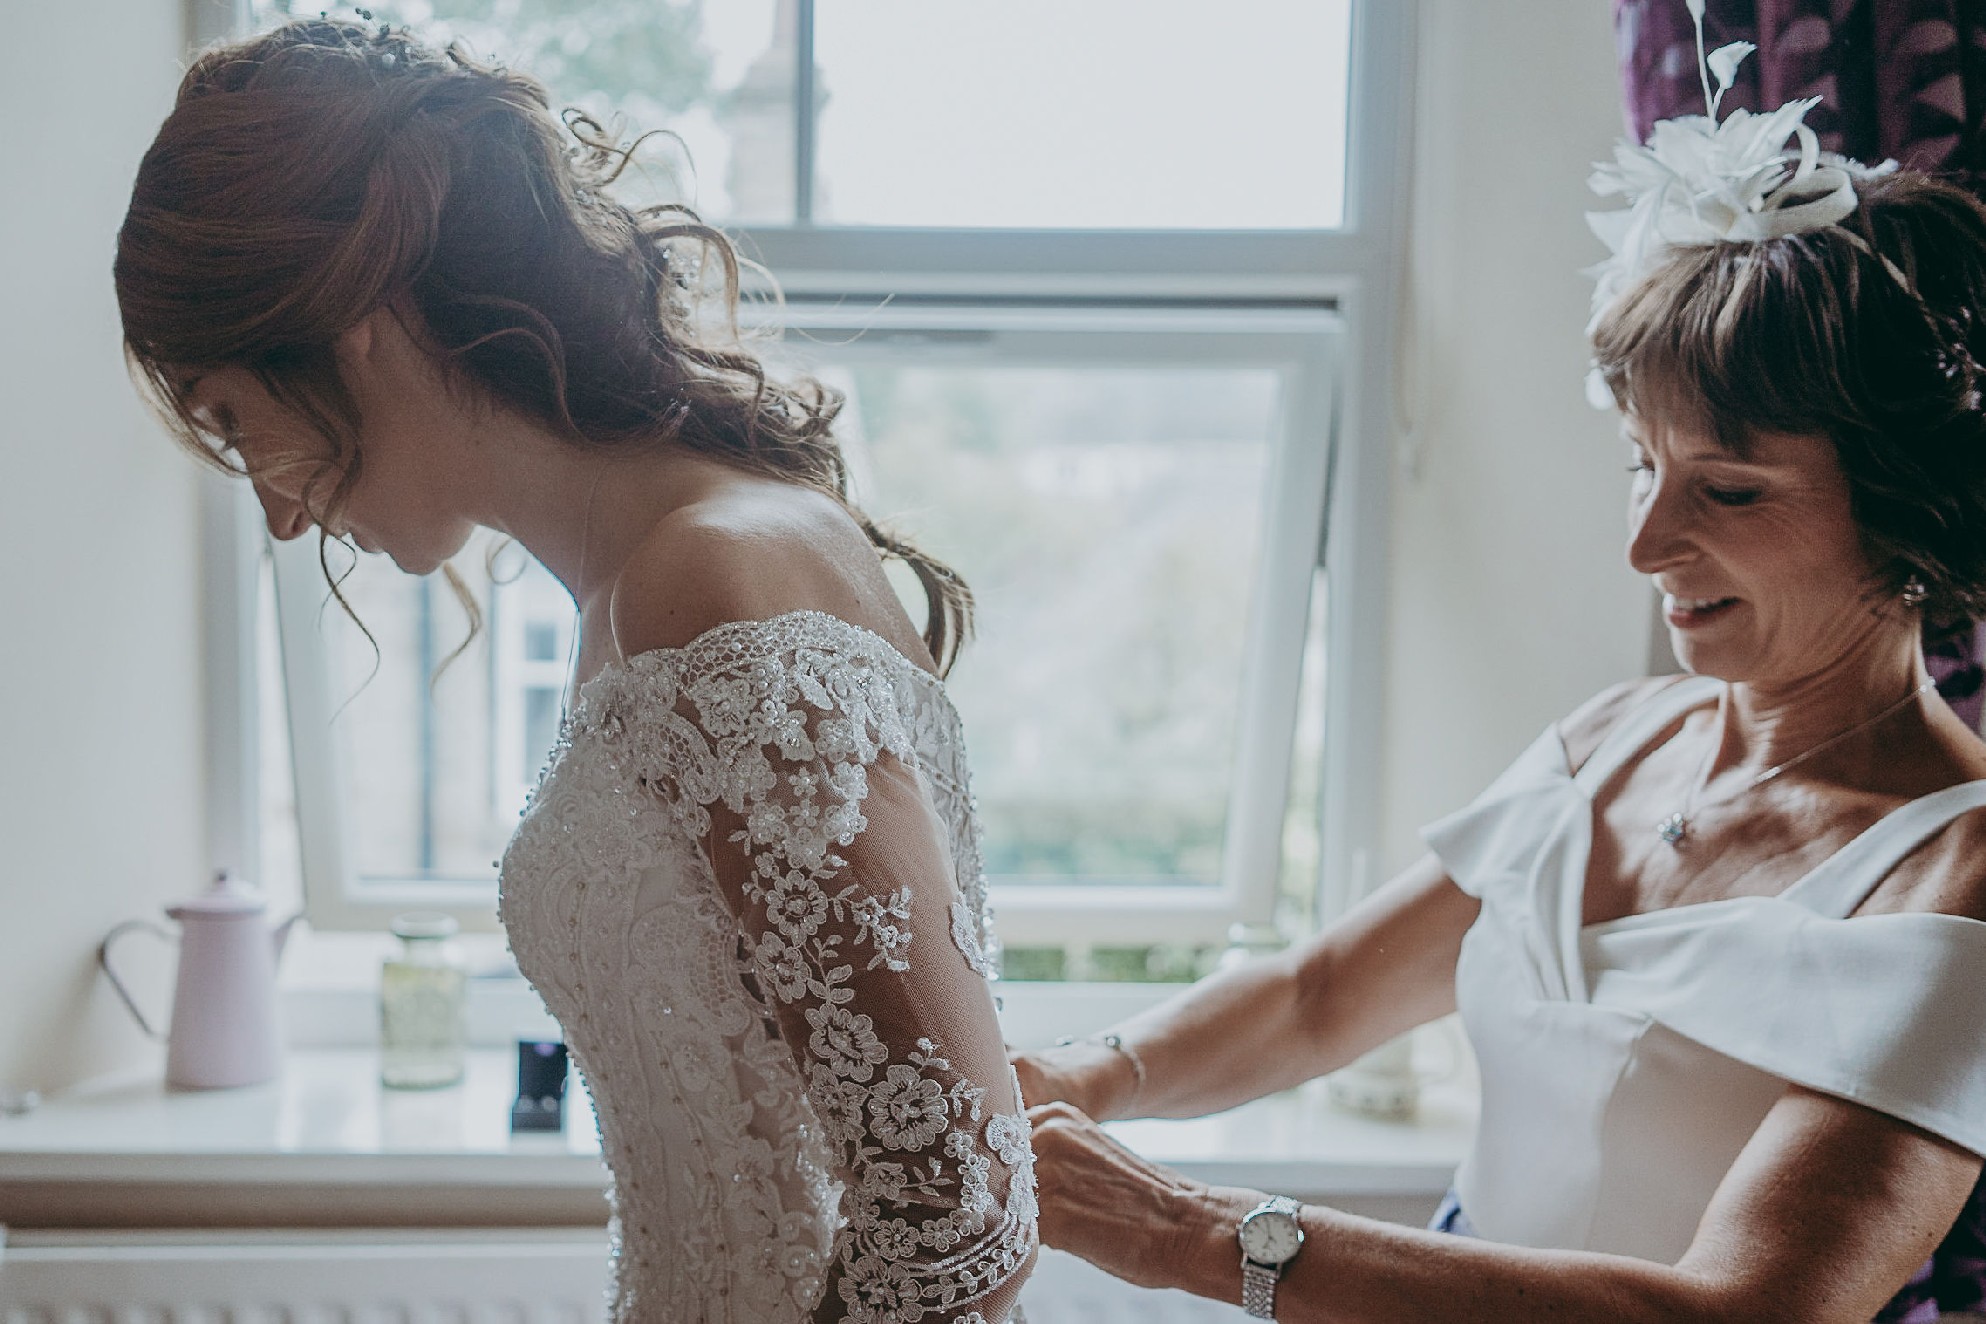 A close-up photo of a mum doing up the back of her daughter’s wedding dress on her wedding day. The bride wears an off the shoulder dress with long sheer and lace applique sleeves. 